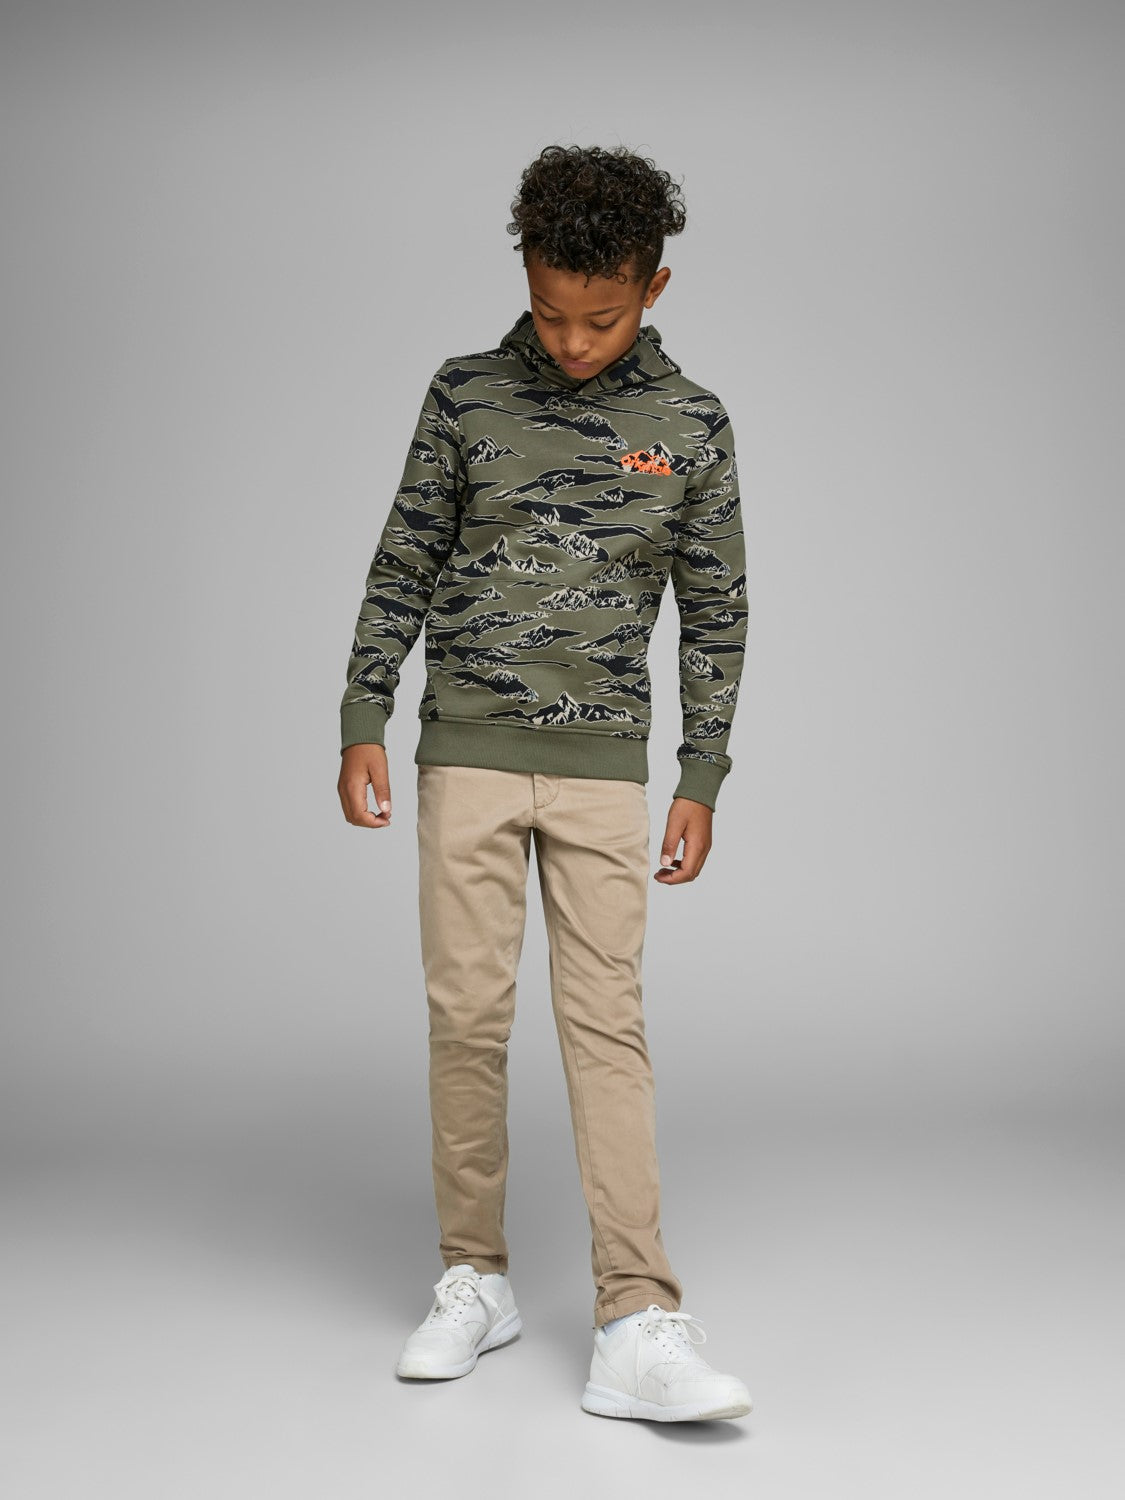 Marco Bowie Junior Chino - Spirit Clothing